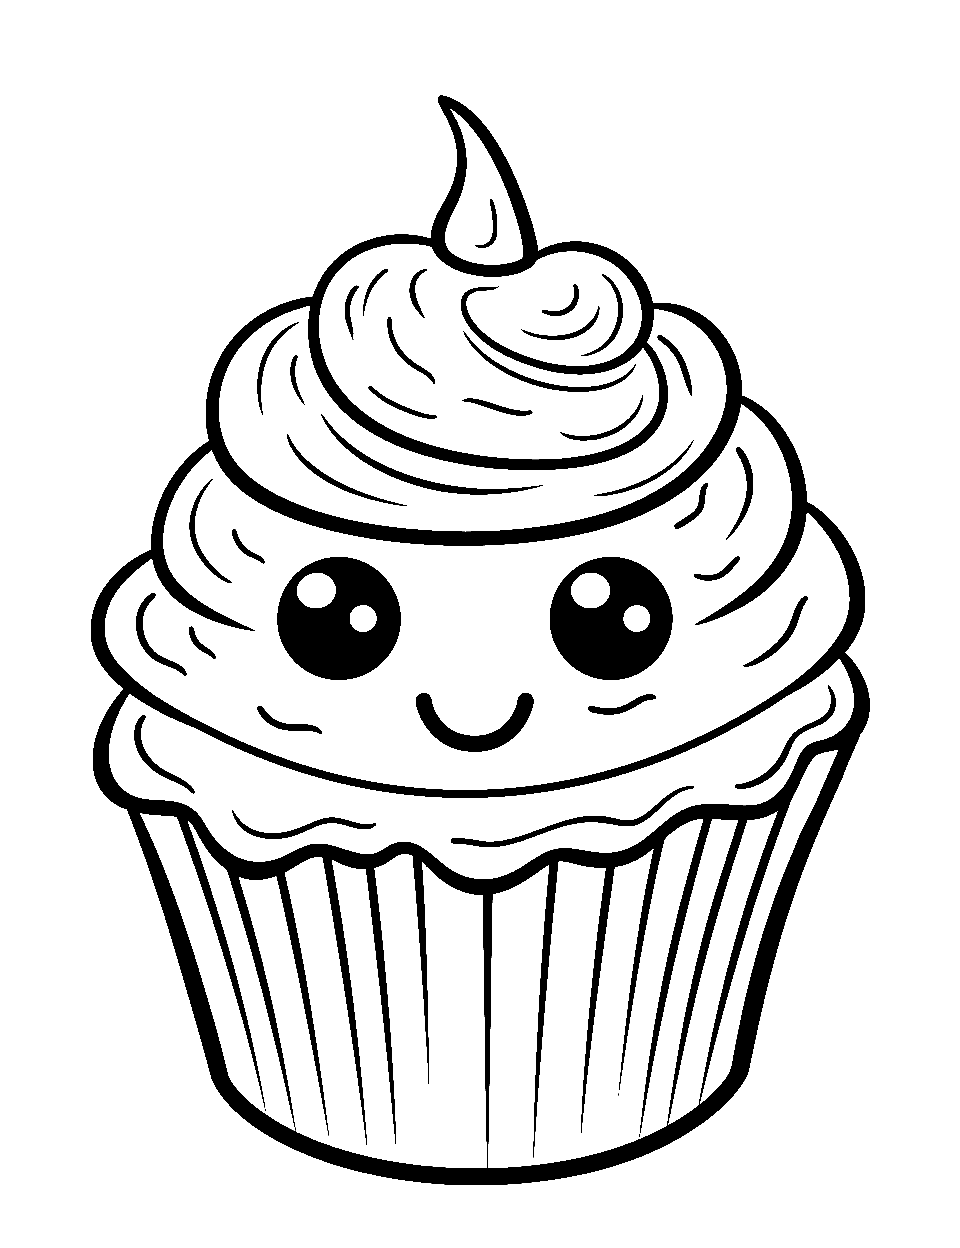 Cute Cupcake Food Coloring Page - A cute-looking cupcake with eyes and a smiling face looking tasty.